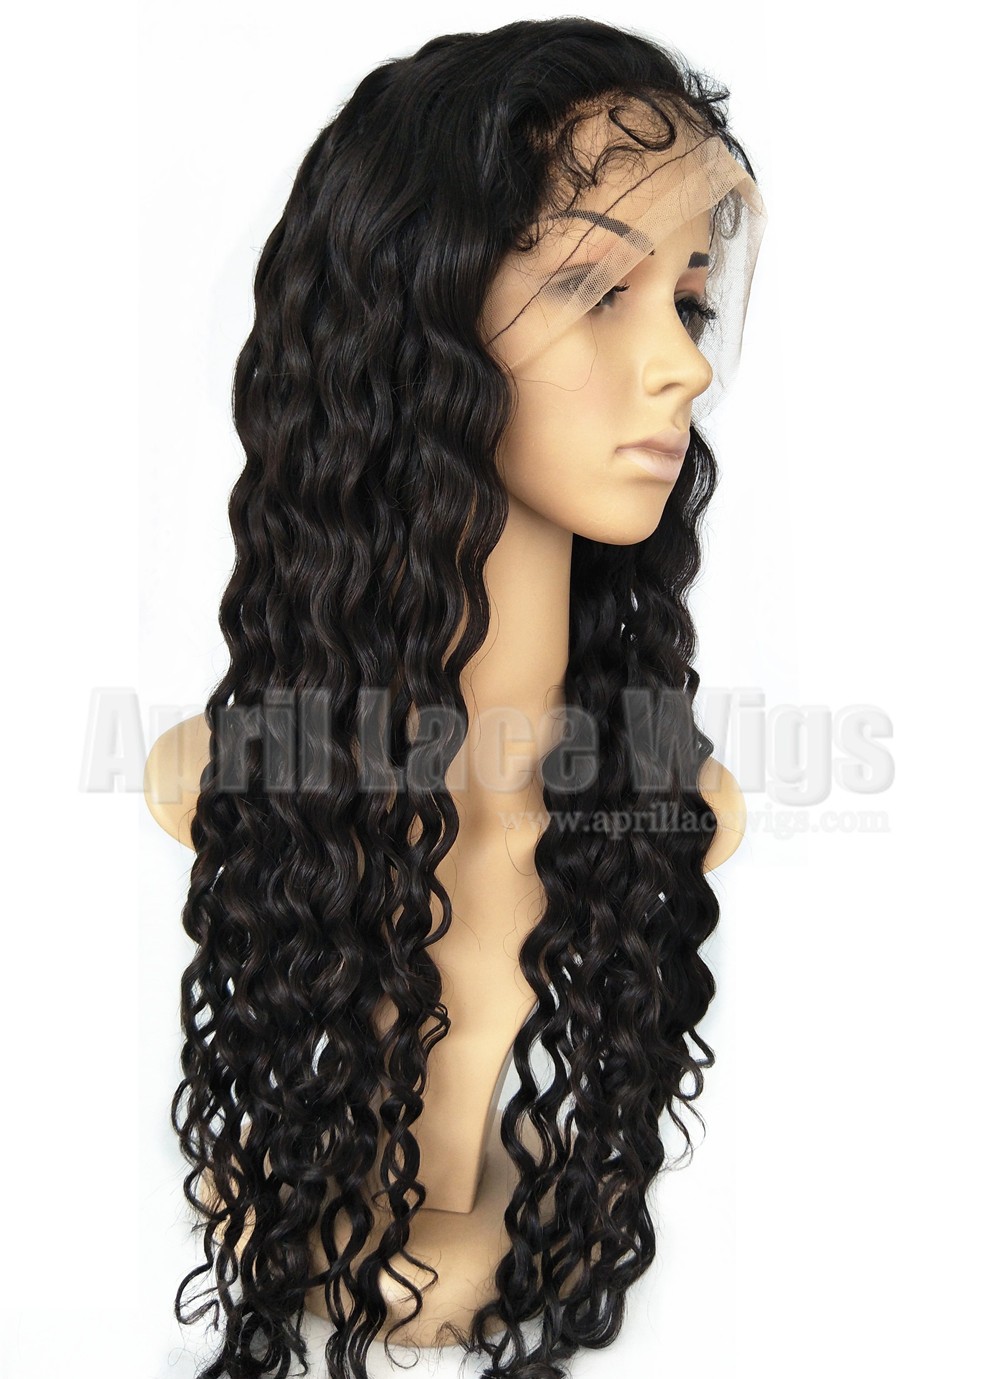 Chinese virgin Curly silk top full lace wig